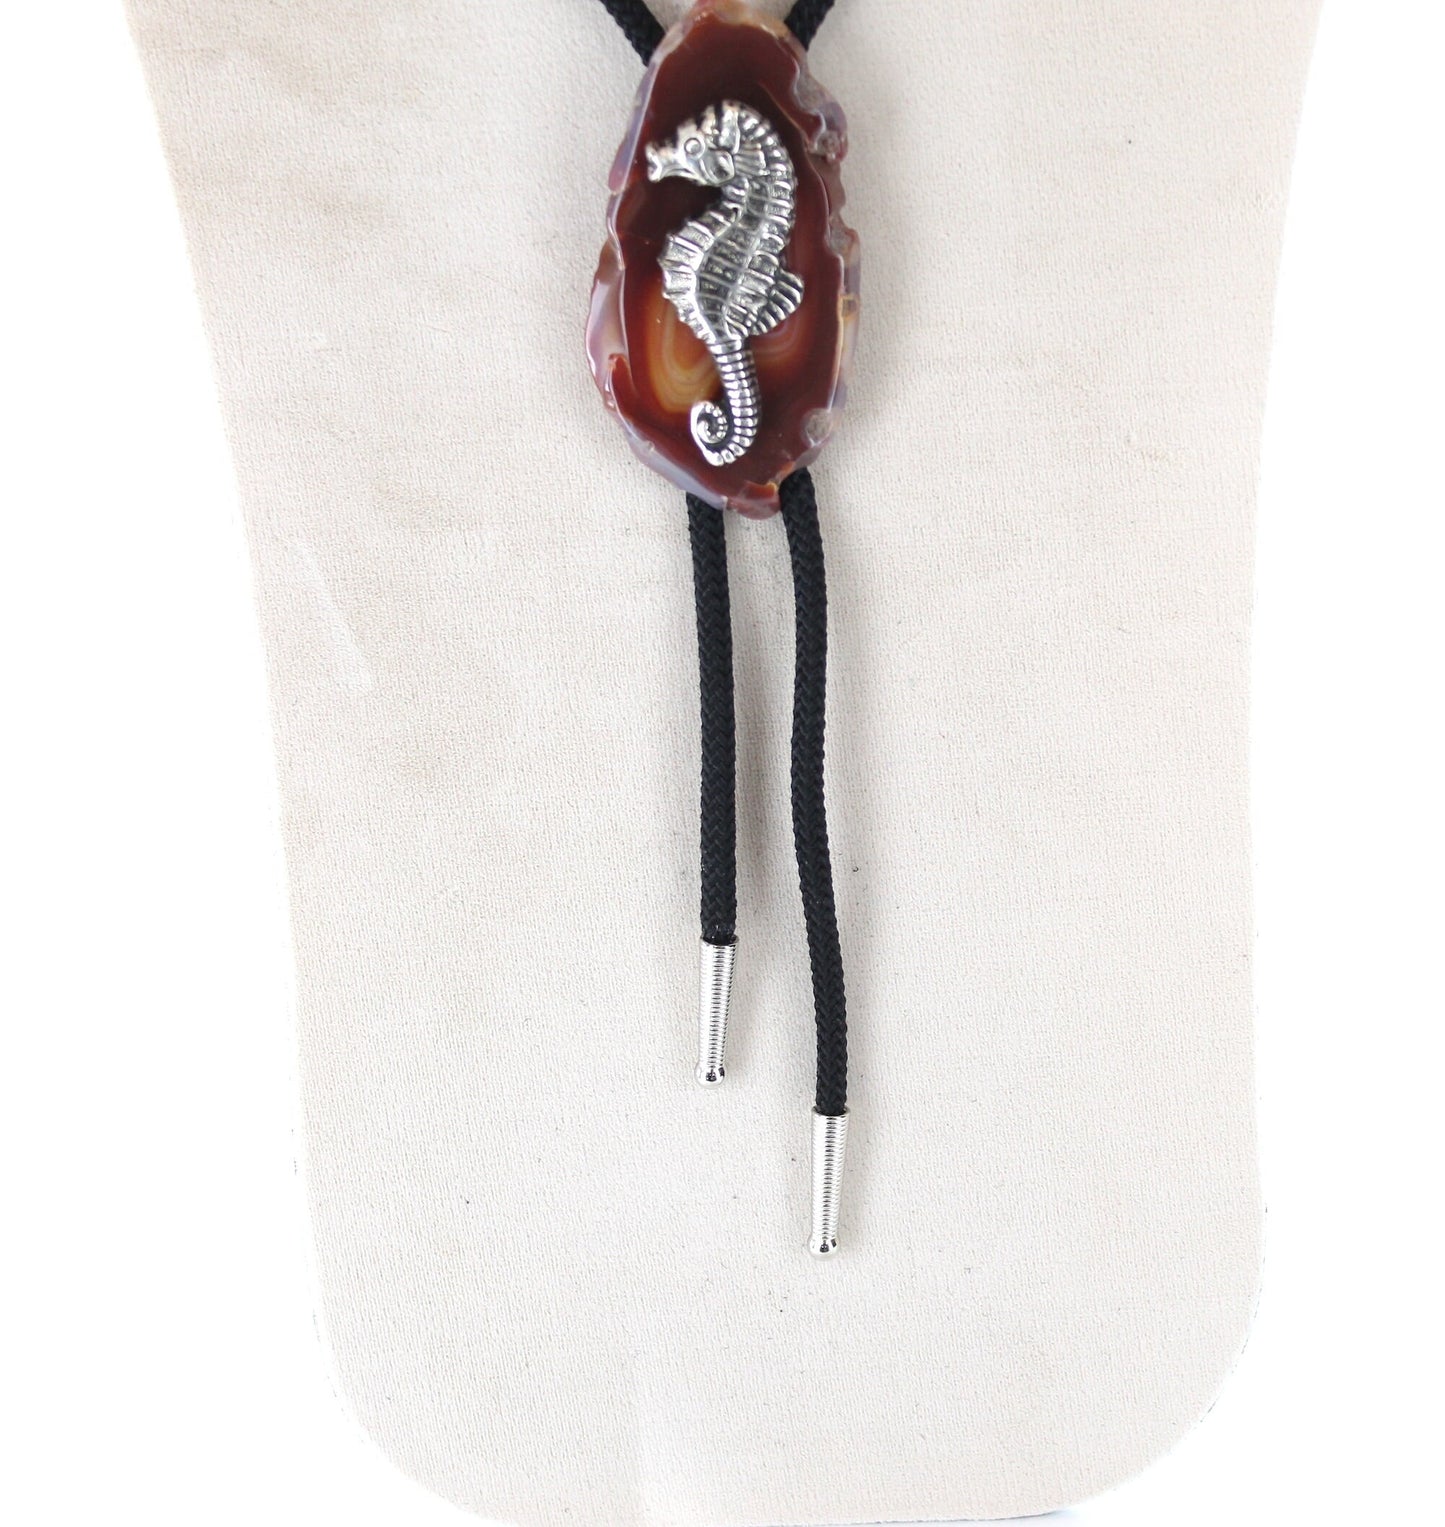 Seahorse Bolo, on agate, black or red 36" cord, made in USA